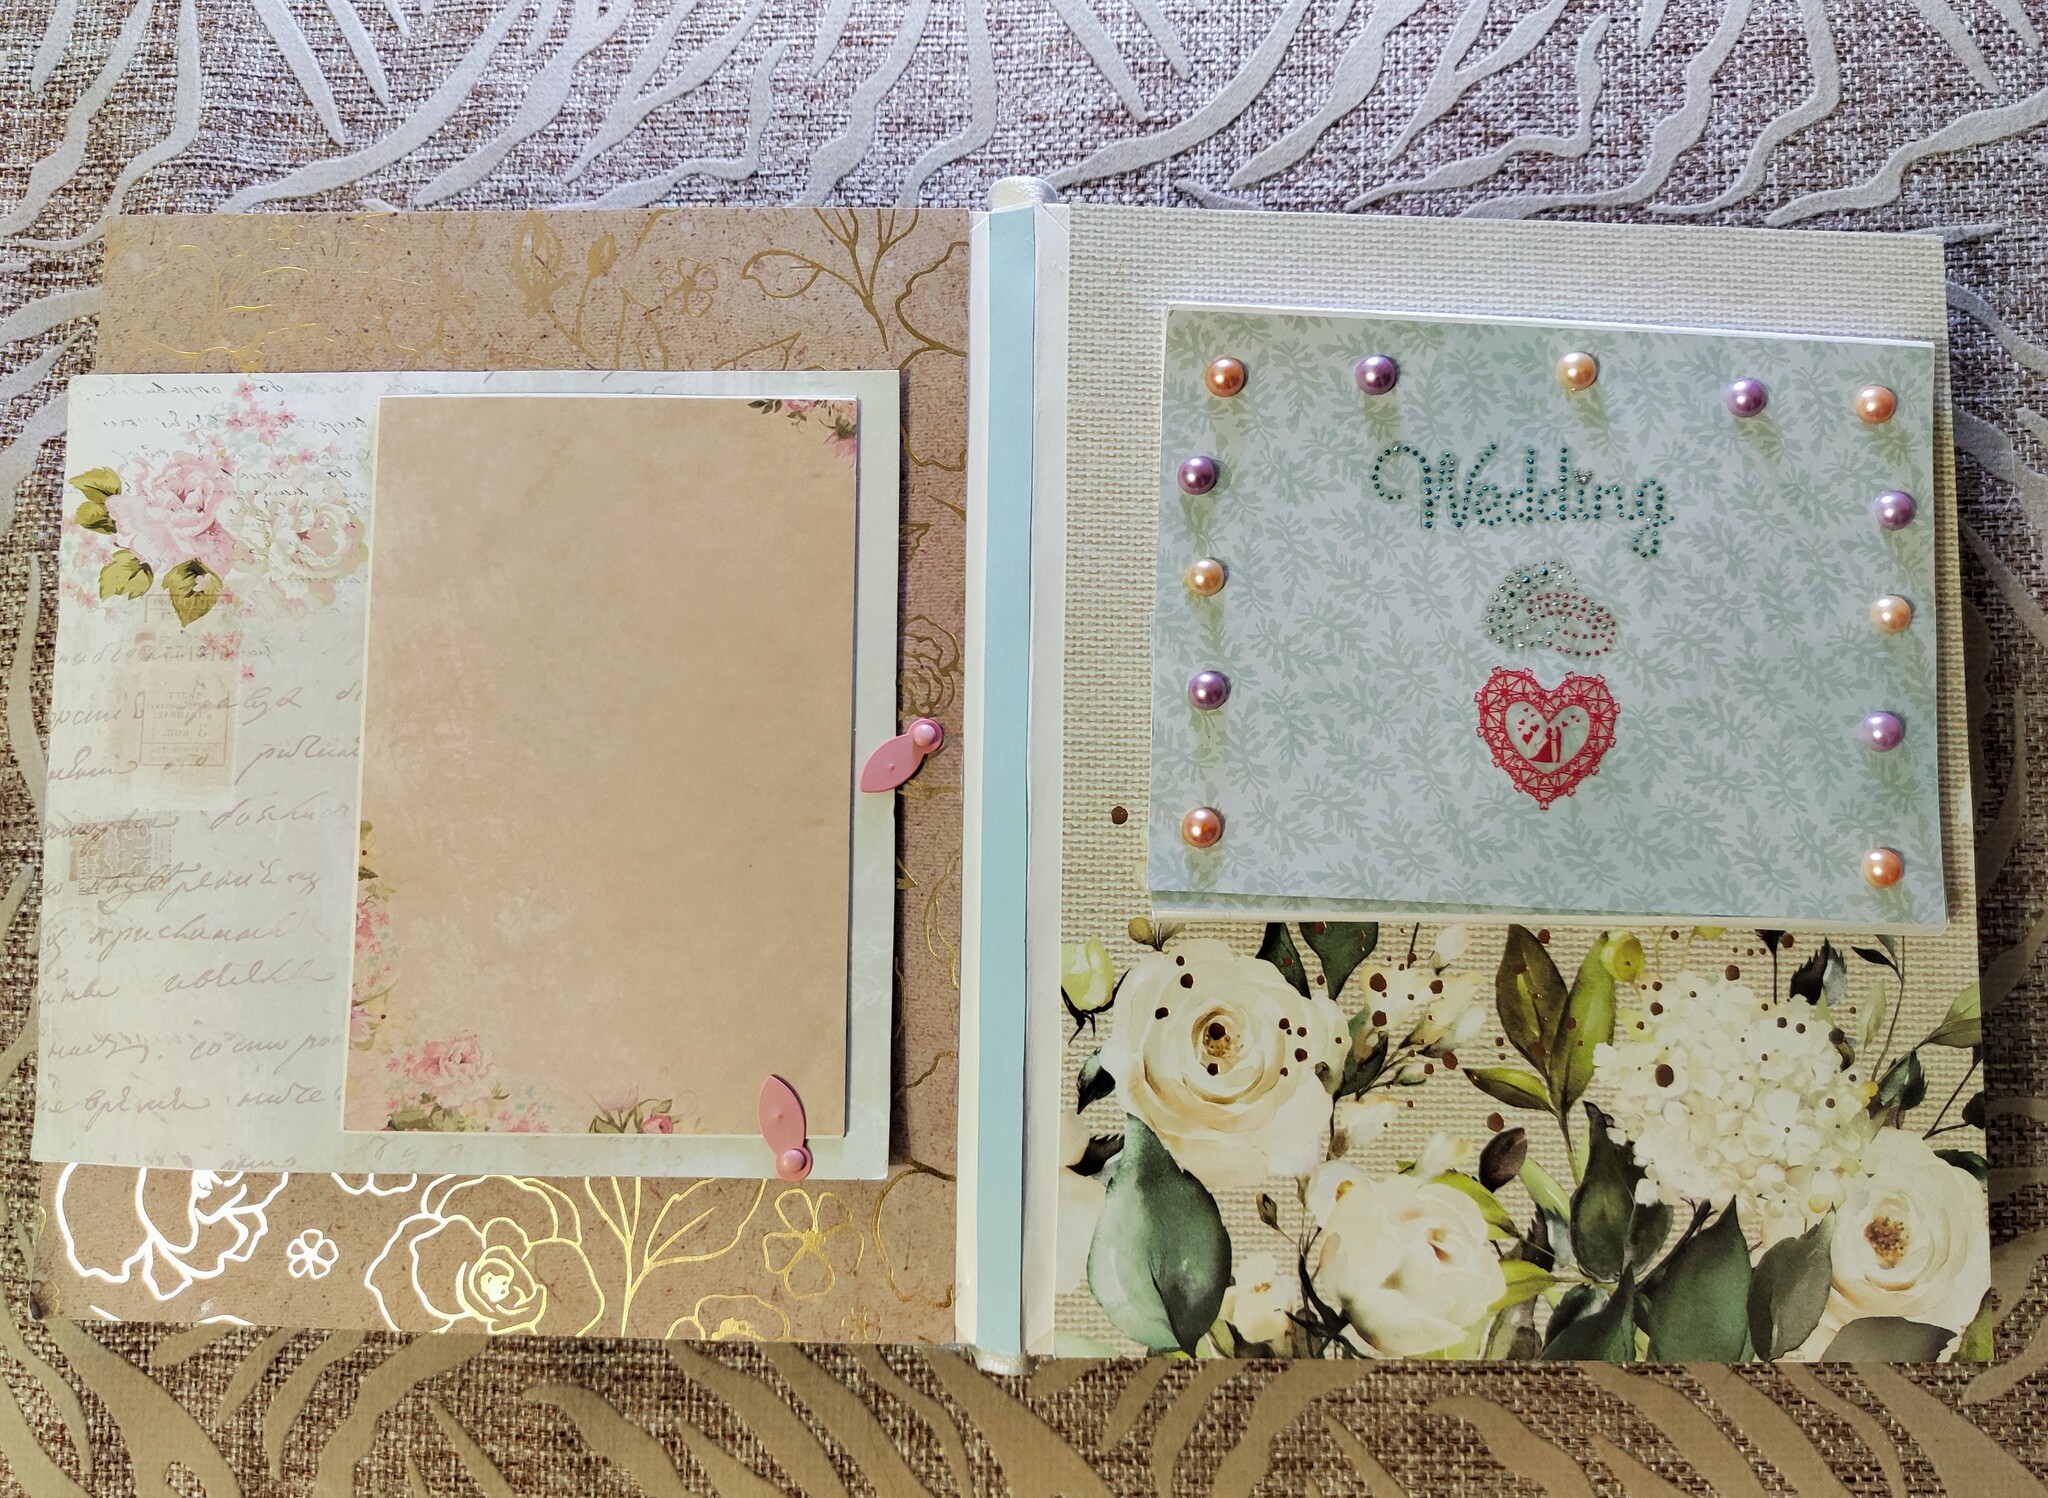 Moments of inspiration... - My, Needlework without process, Needlework, Album, Scrapbooking, With your own hands, Crafts, Decor, Inspiration, Longpost